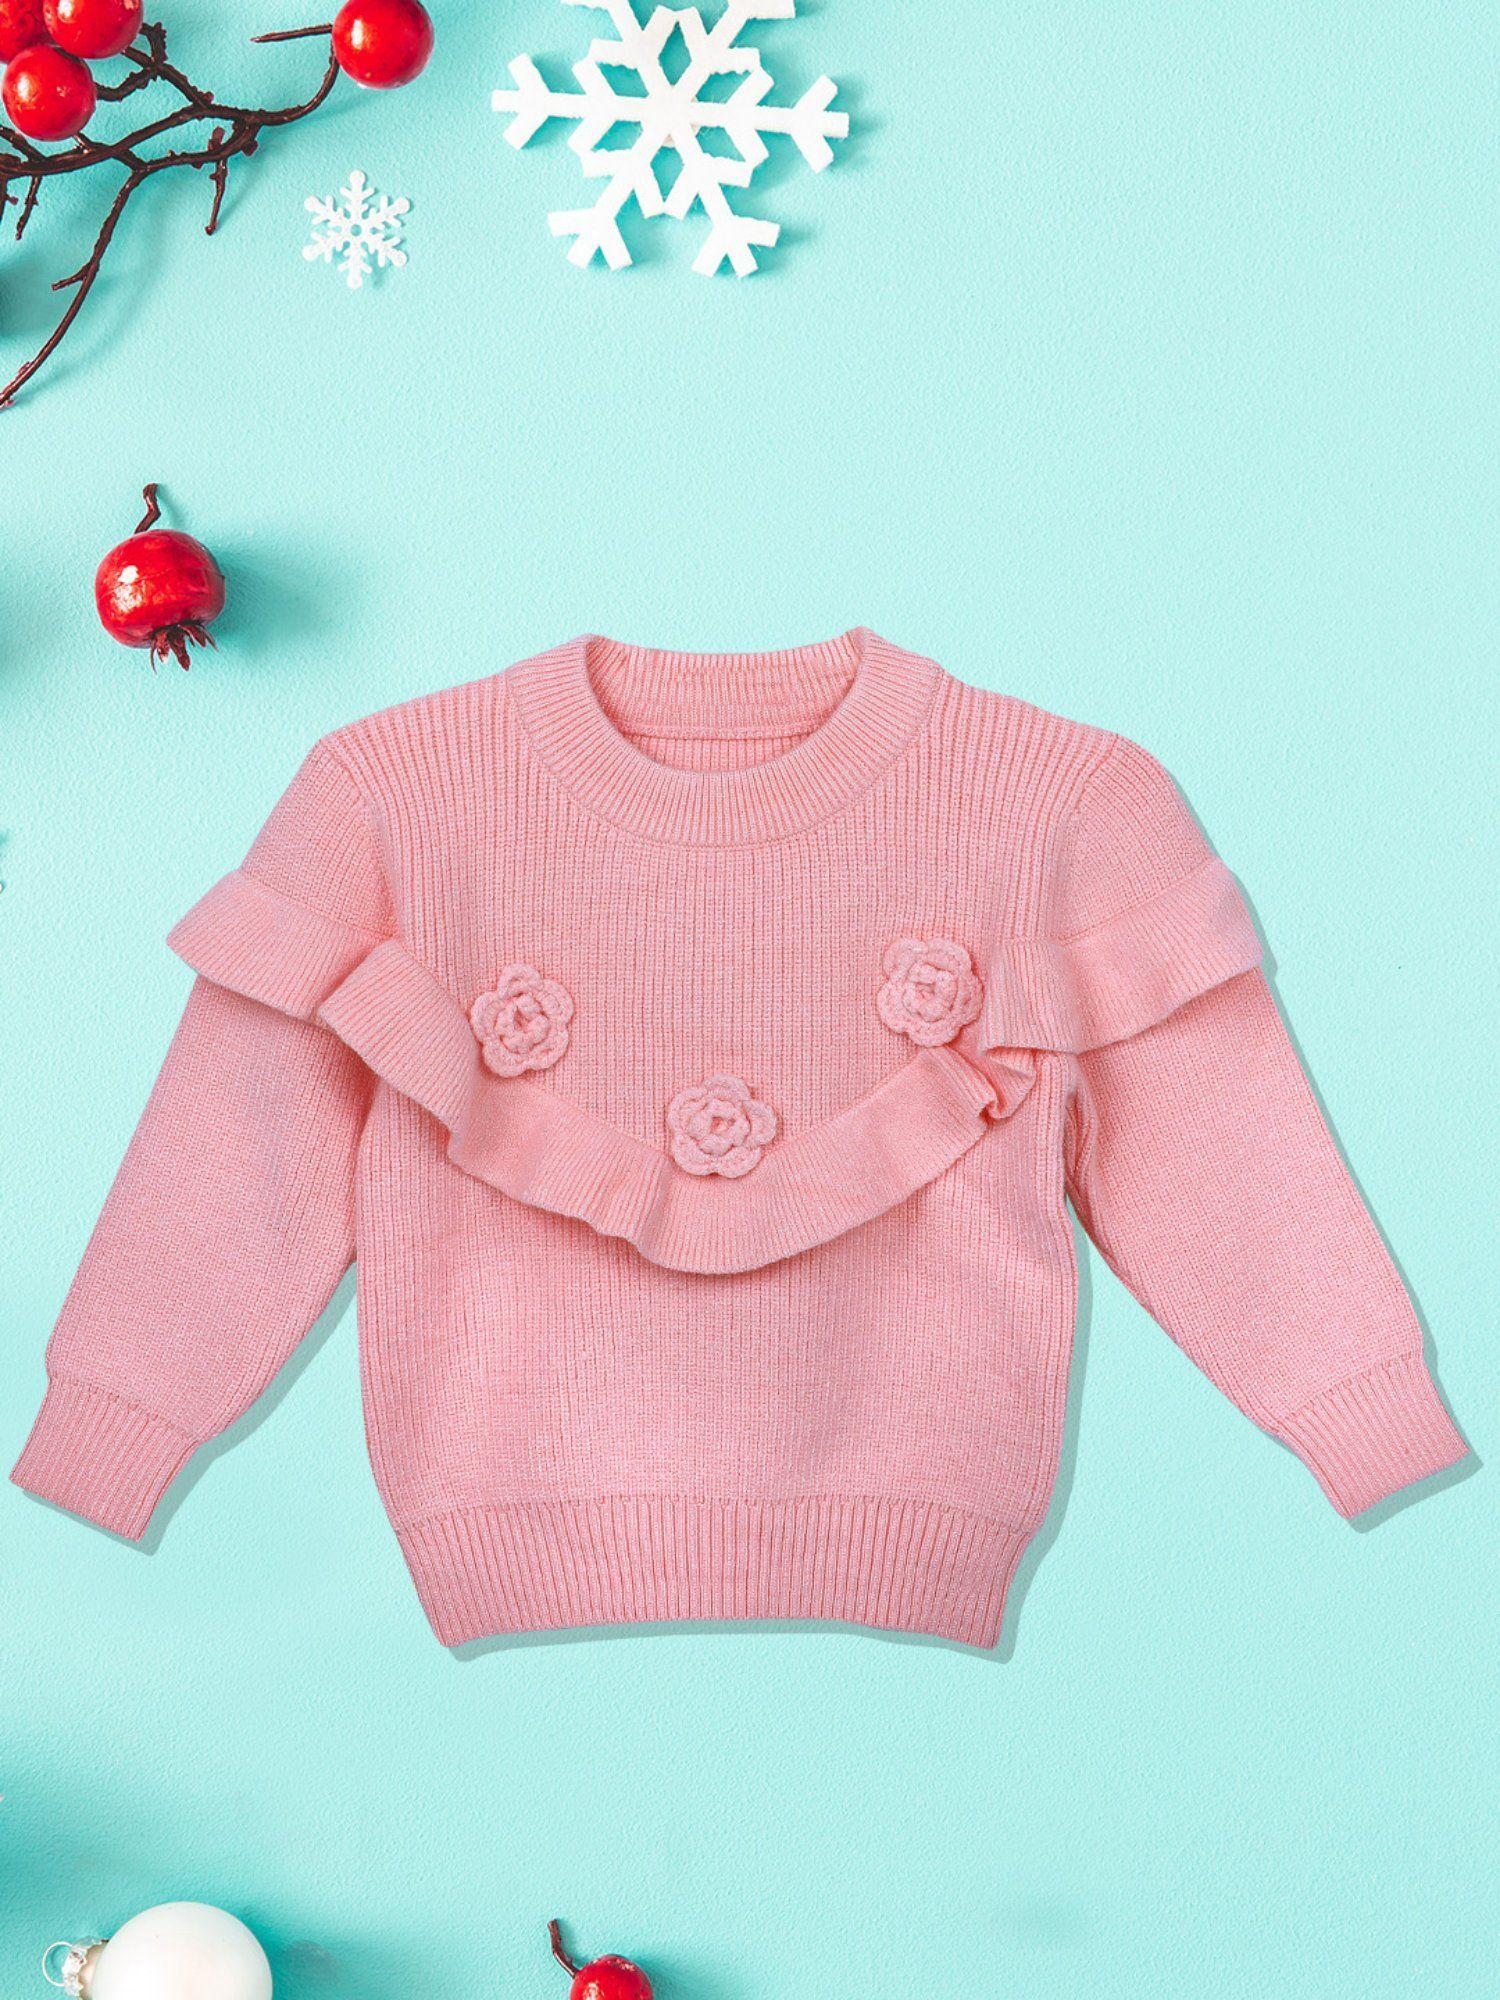 Flowers and Frills Premium Full Sleeves Knitted Sweater Peach